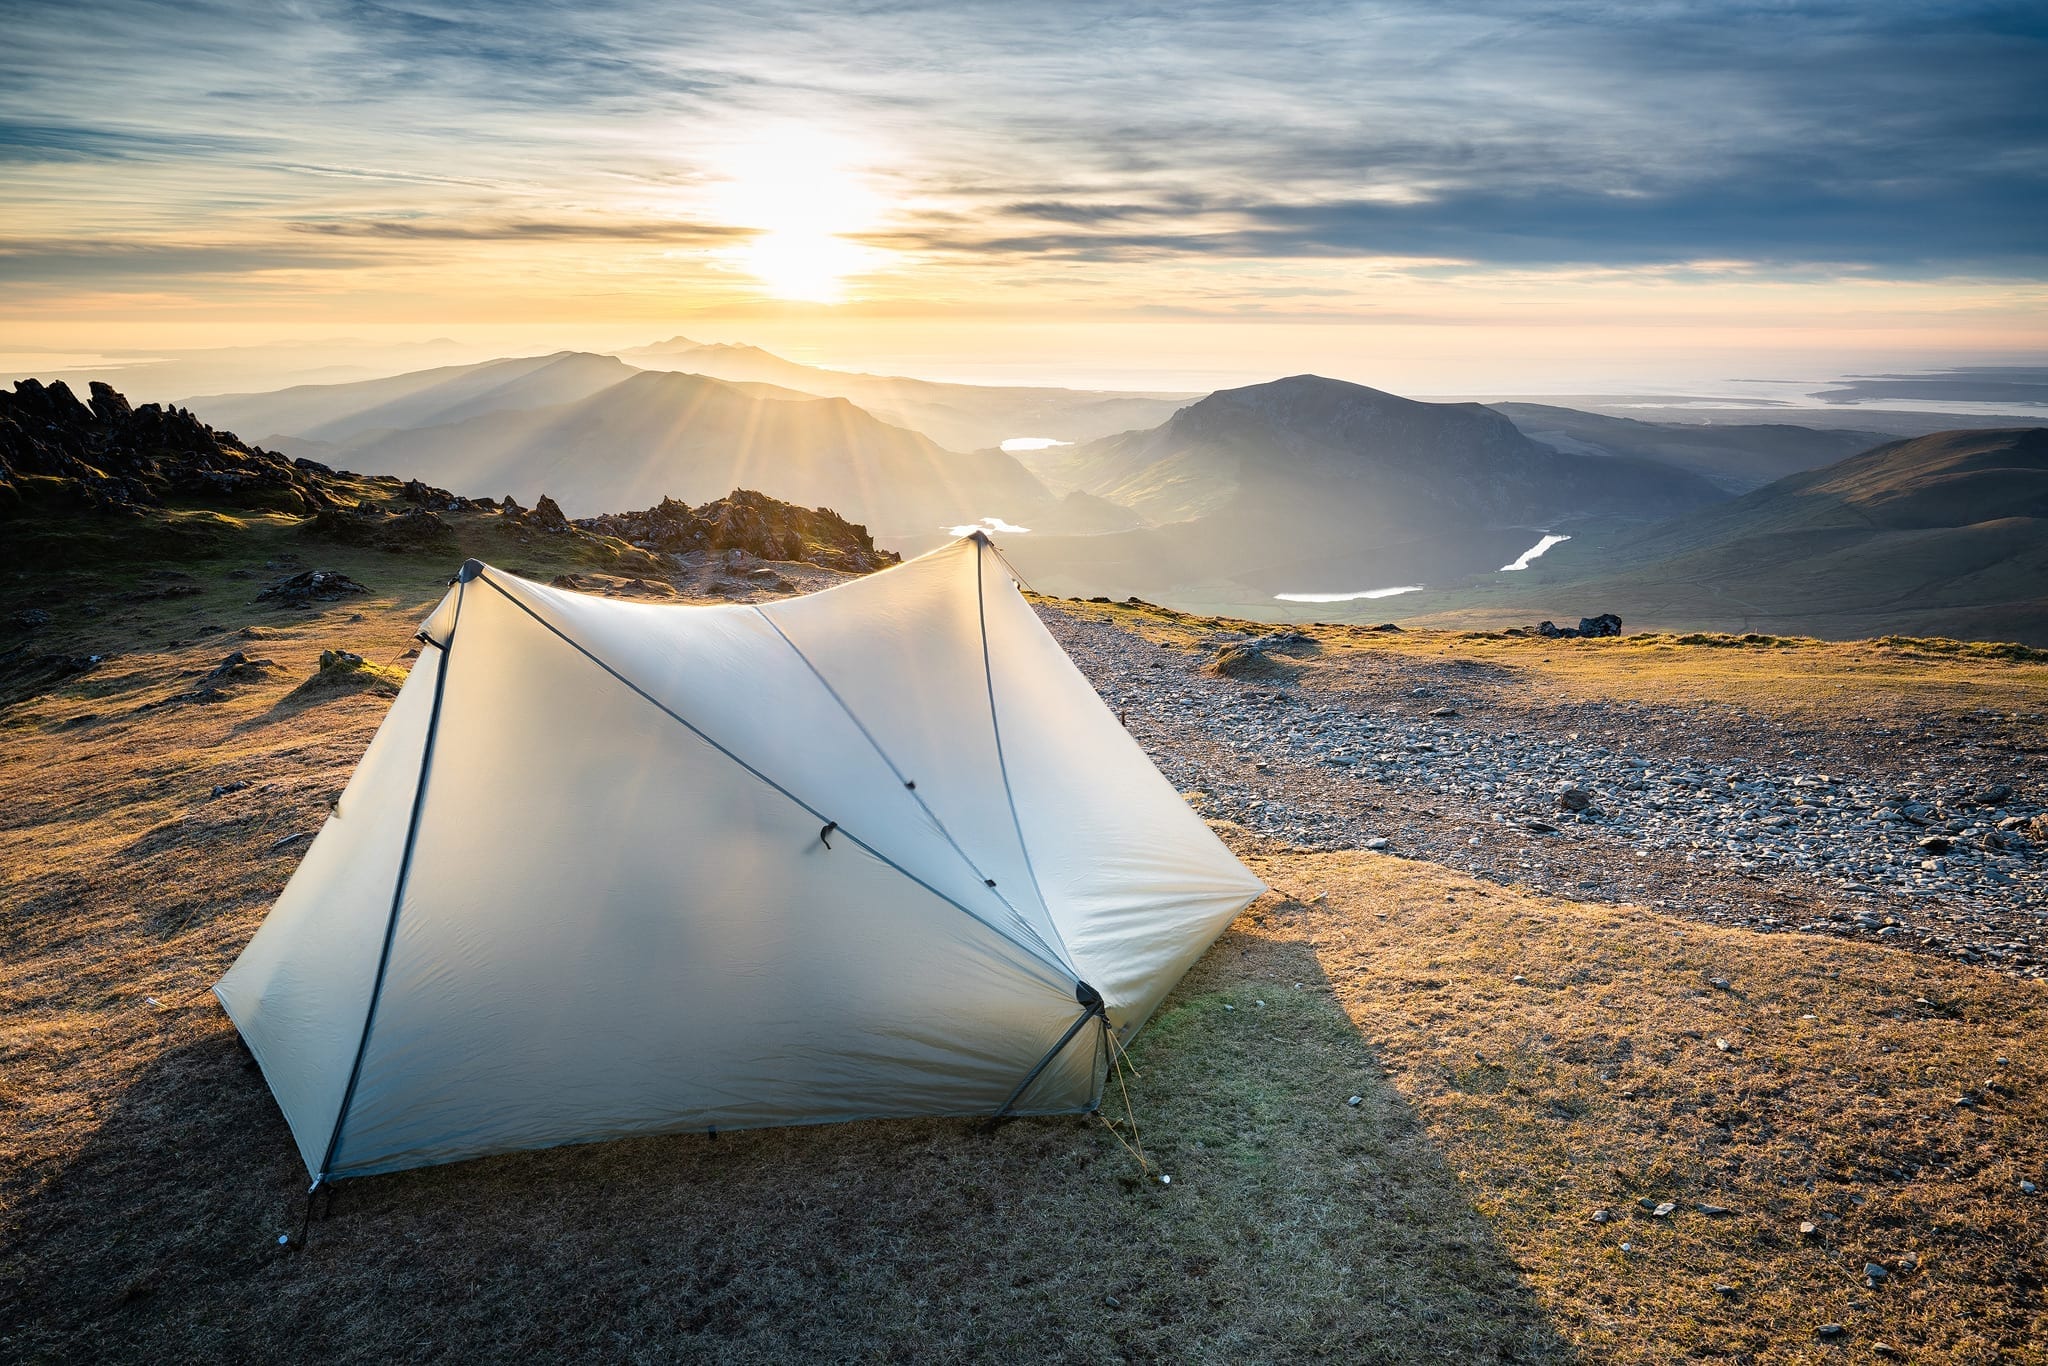 Tarptent Wild Camping on the Rhyd Ddu Path - Snowdonia Wild Camping Photography Workshop